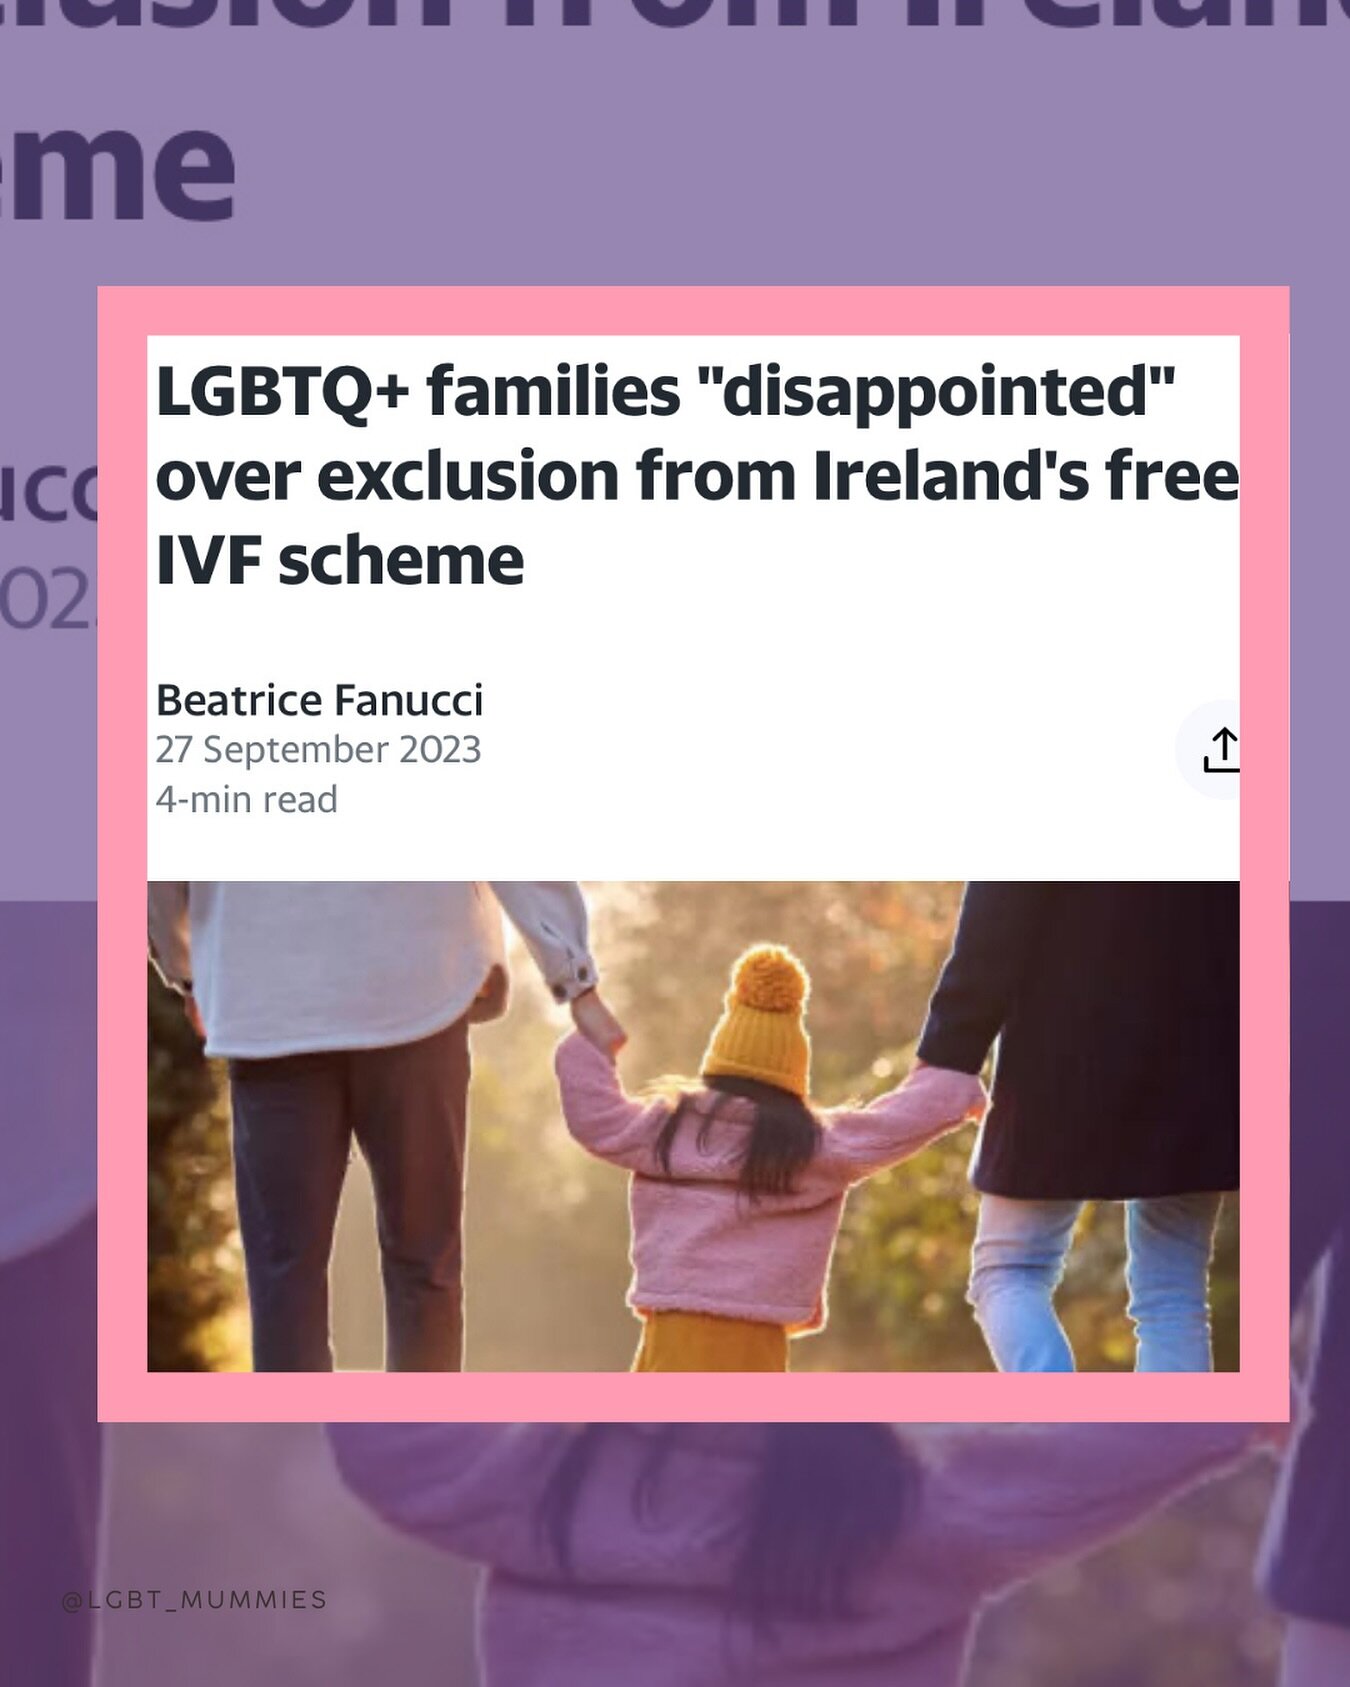 💜NEWS: LGBTQ+ families (&amp; single people) left out of Free Fertility Treatment offering in Ireland💜
.
LGBTQ+ advocacy groups and families have expressed disappointment in regard to the Irish government&rsquo;s decision to exclude same-sex couple